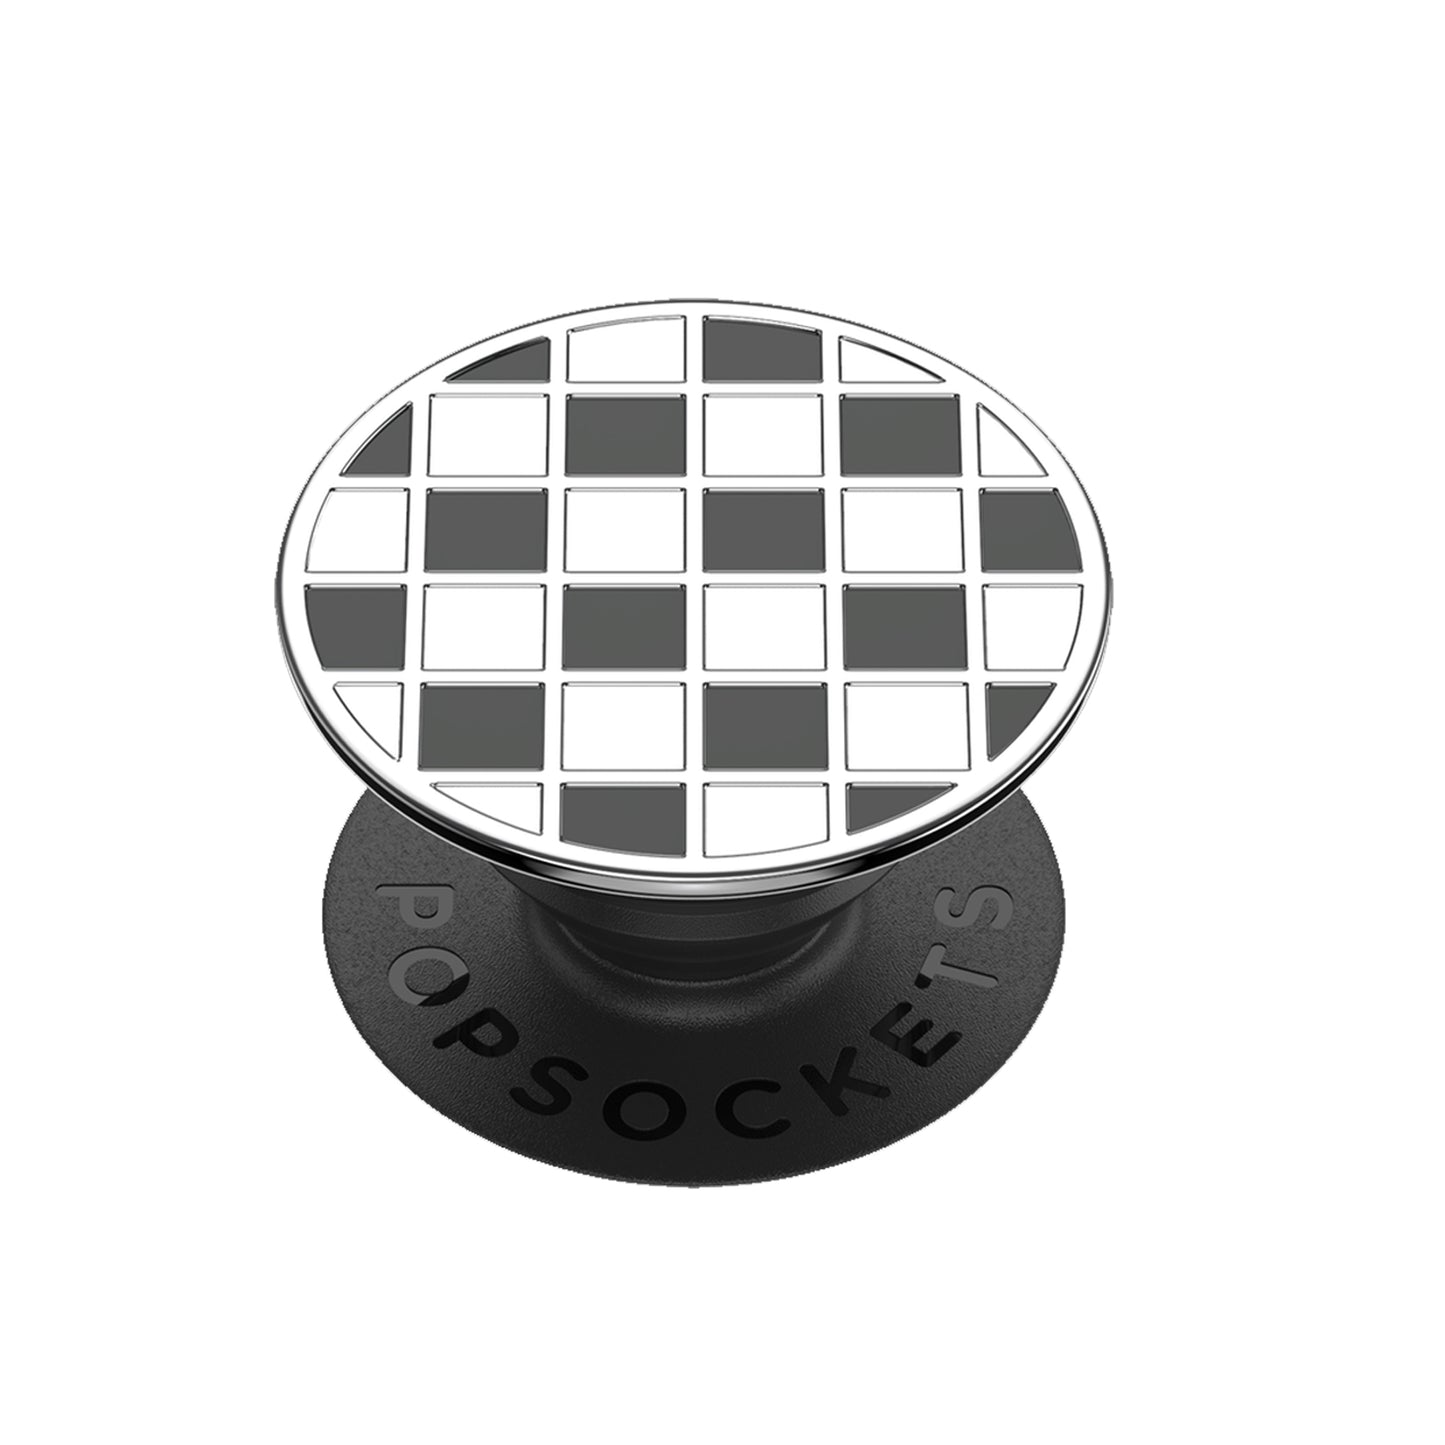 PopSockets Swappable Premium Enamel - Counter Culture Black (Barcode: 842978165851 )